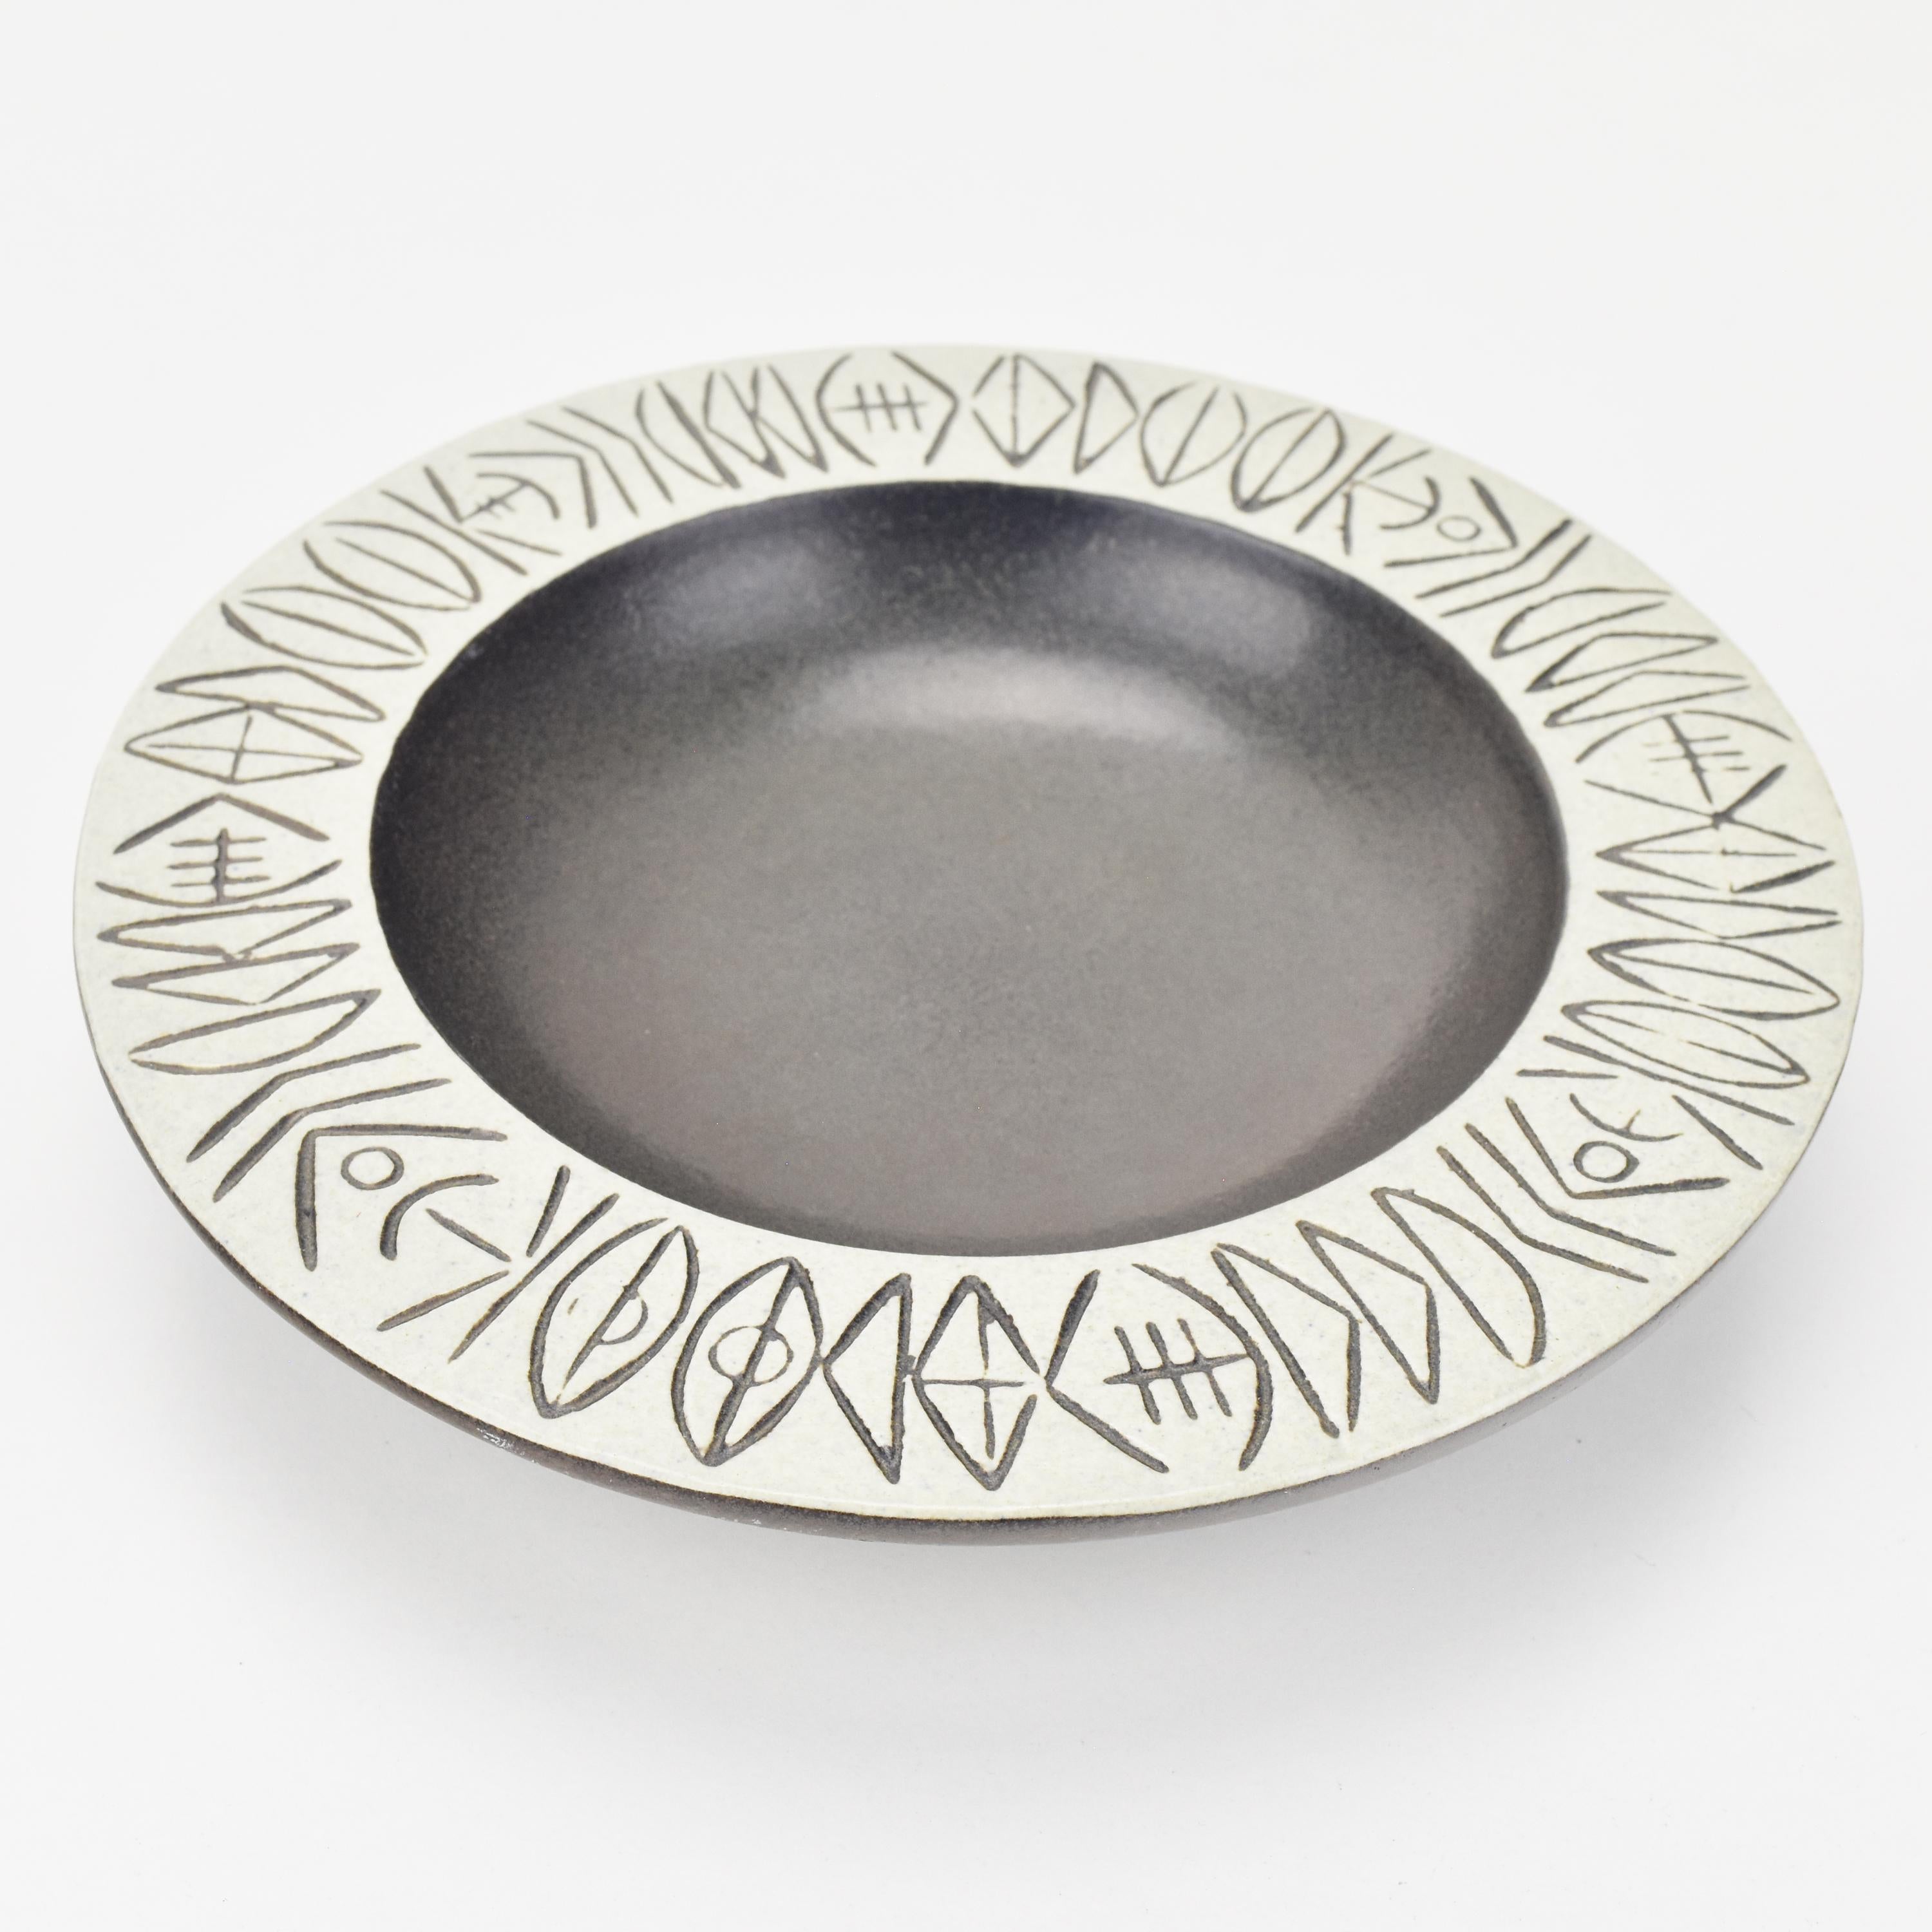 Lisa Larson Gustavsberg Paloma Stoneware Bowl

Revive the charm of yesteryears in your home or office with the Lisa Larson Gustavsberg Paloma stoneware bowl. 

Designed by the renowned Lisa Larsson in Sweden, this Paloma pattern Gustavsberg bowl,